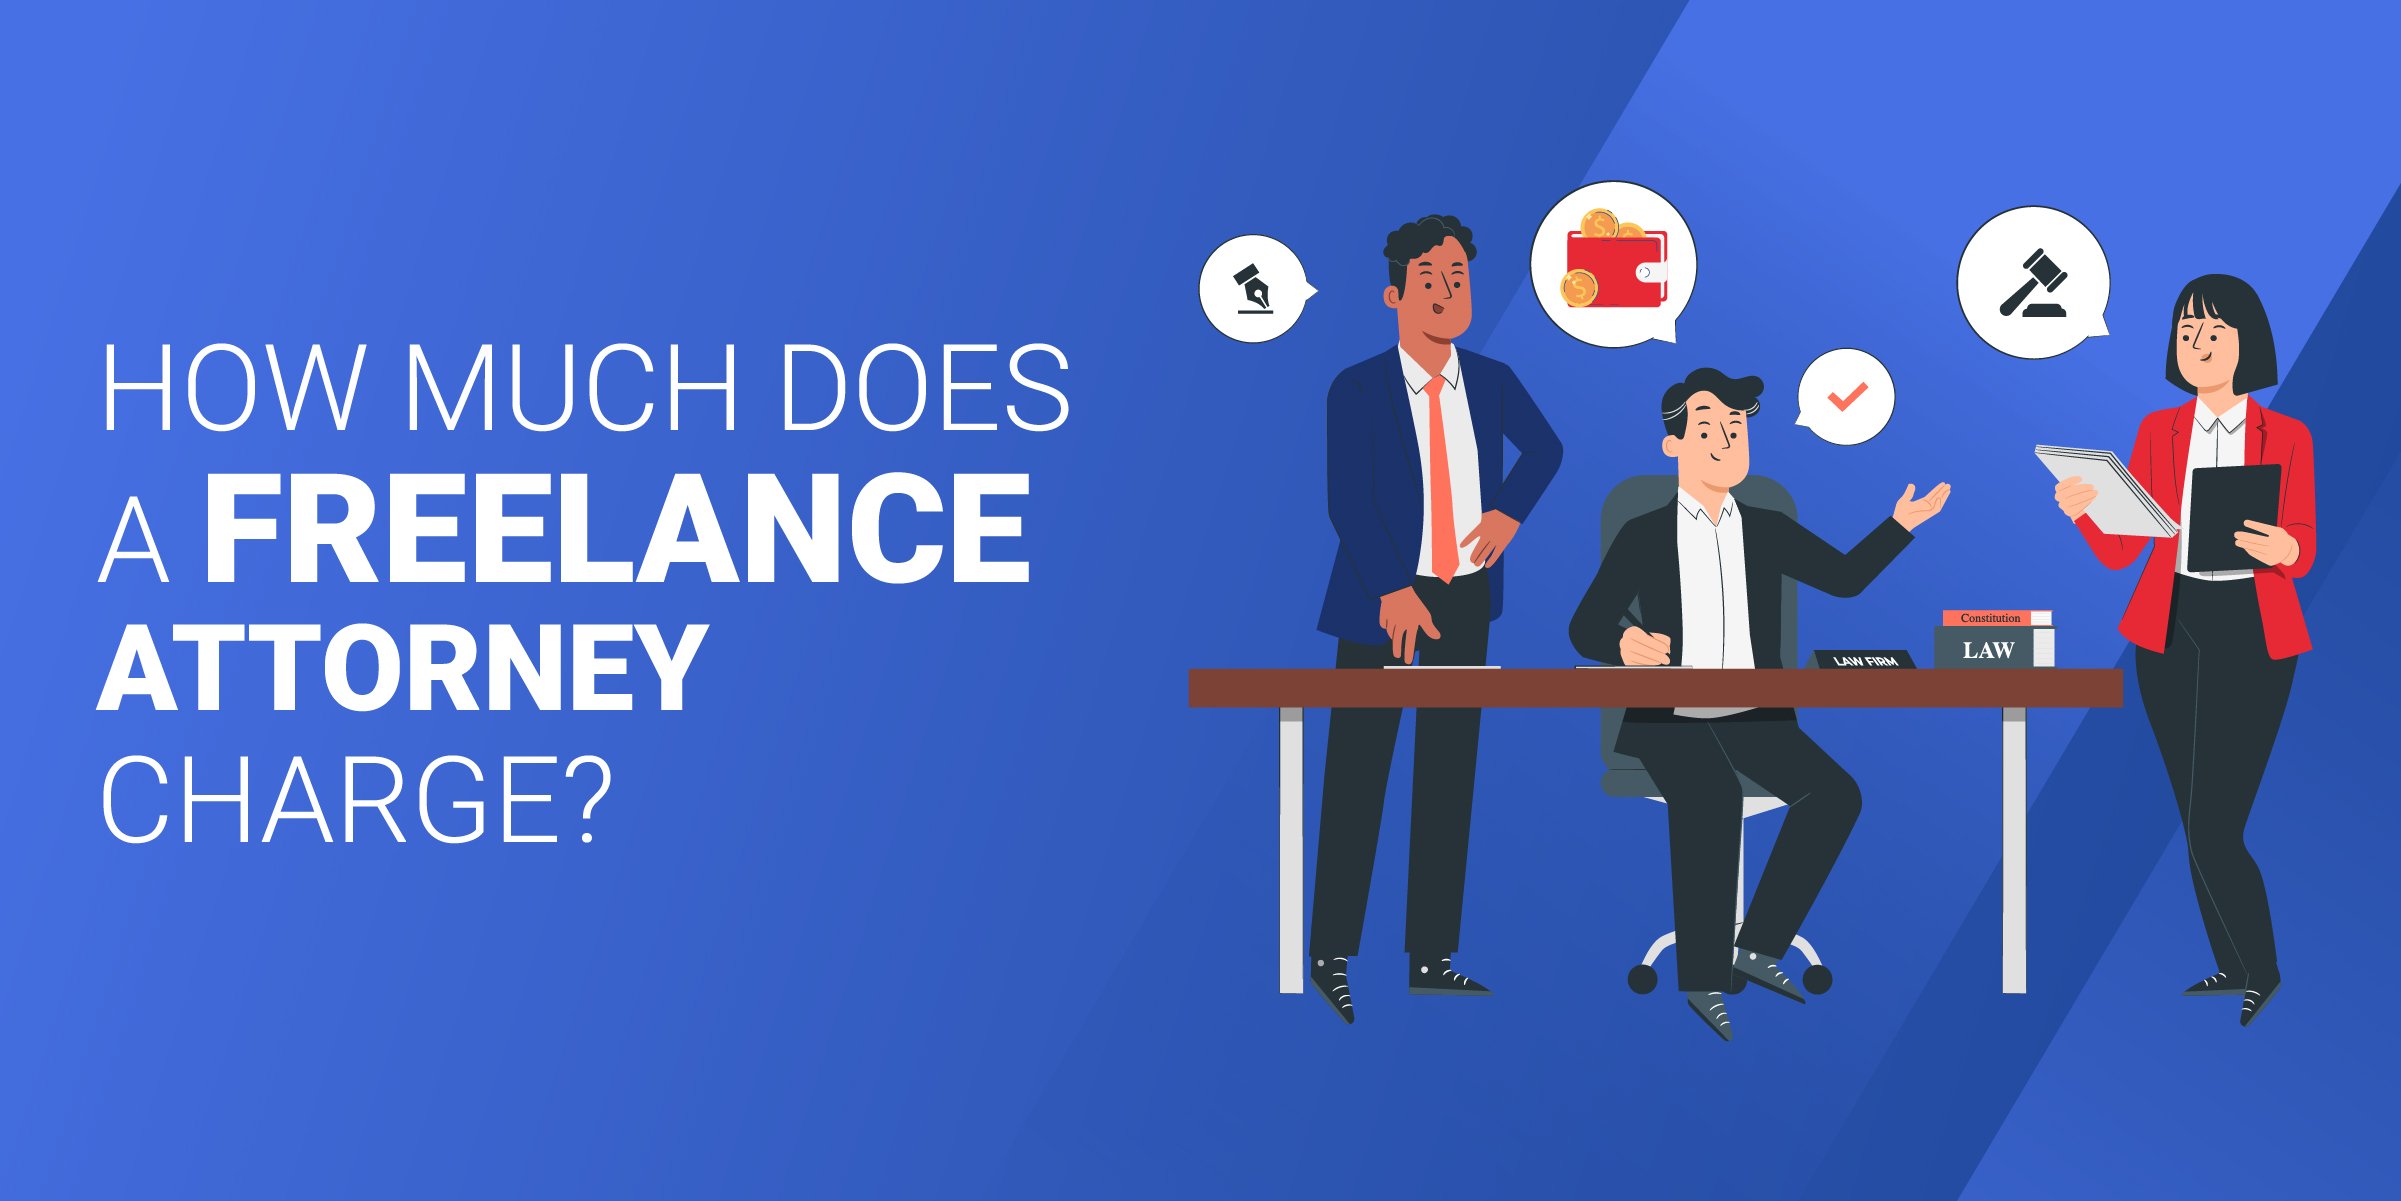 How Much Does a Freelance Attorney Charge